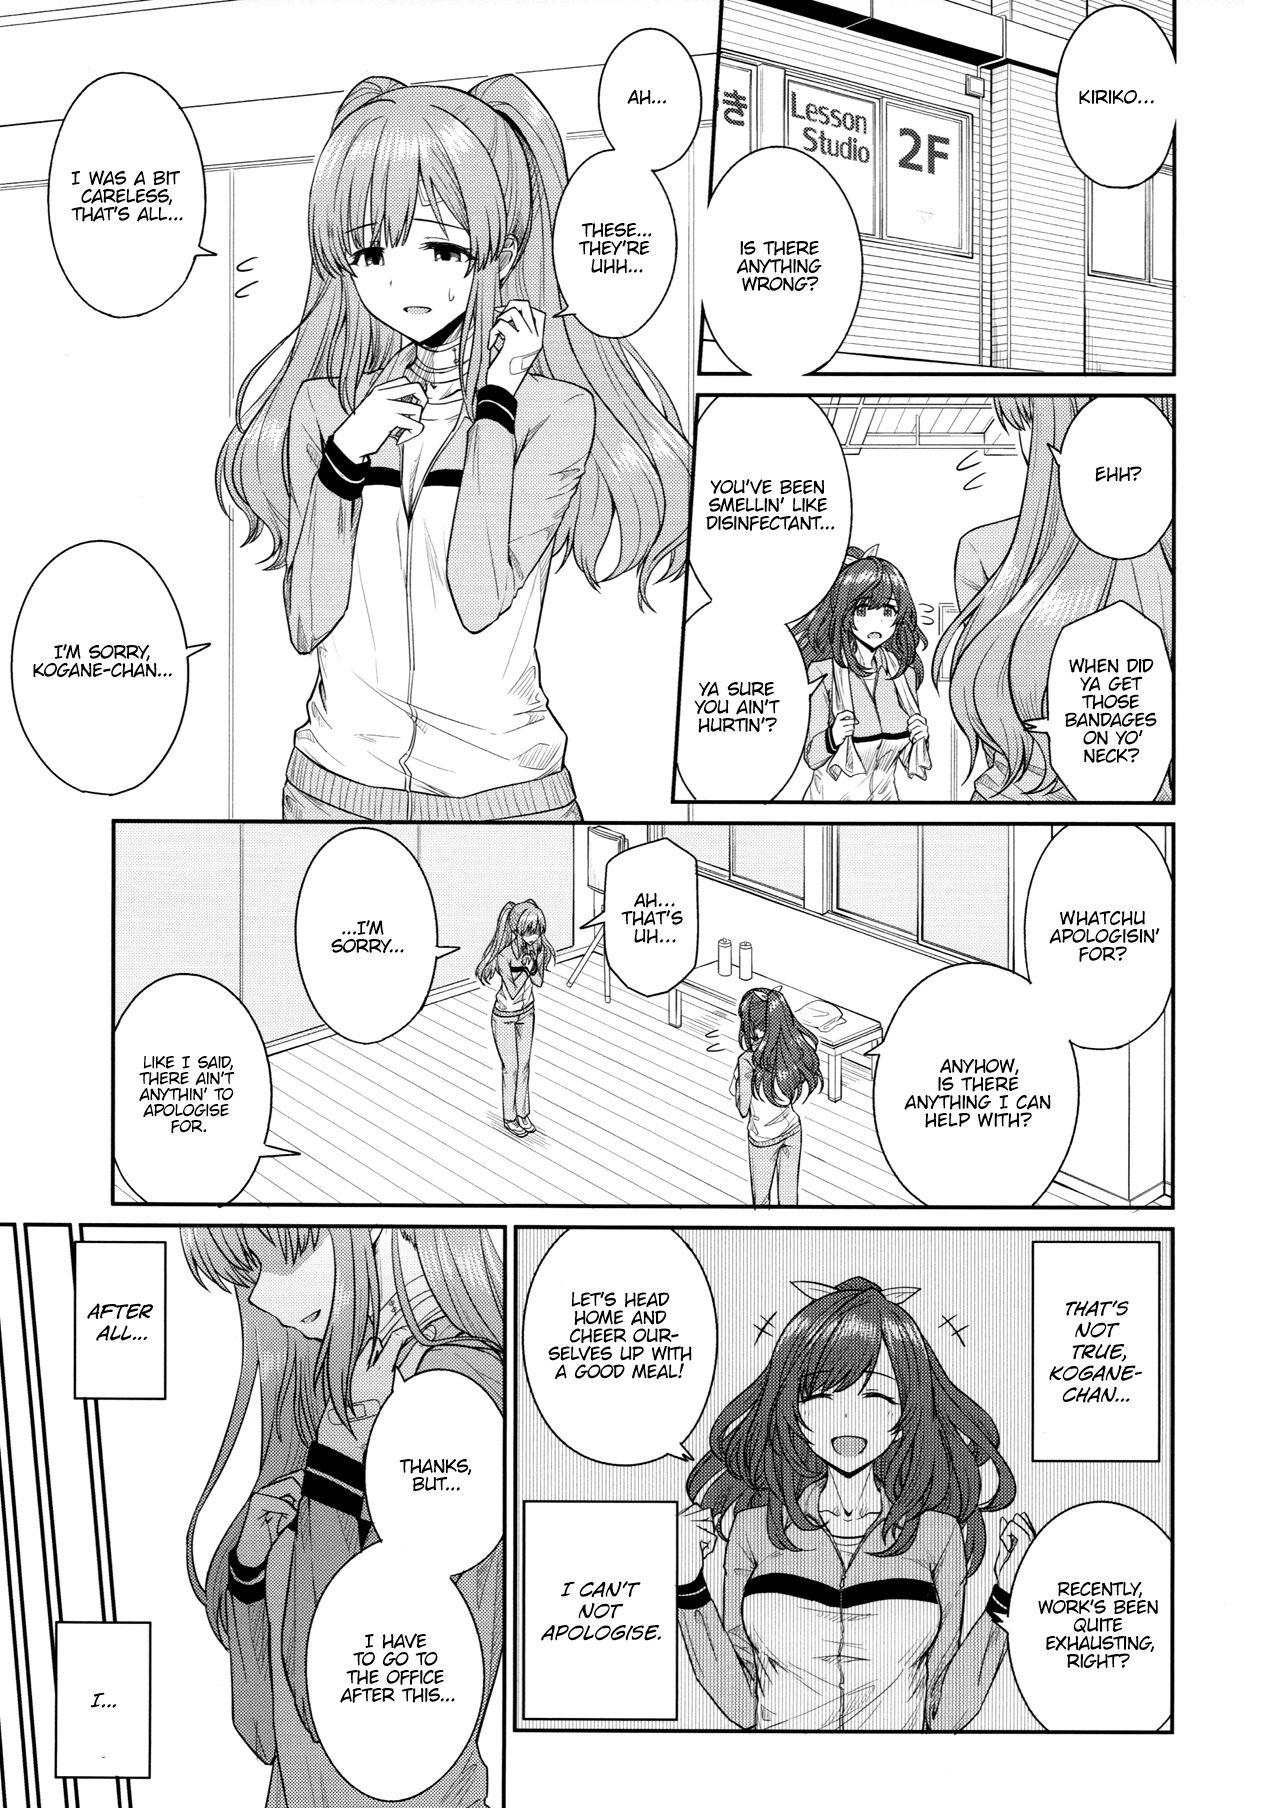 Asian Mou Hakui wa Niawanai | The White Gown Doesn't Suit Me Anymore - The idolmaster Mexico - Page 2